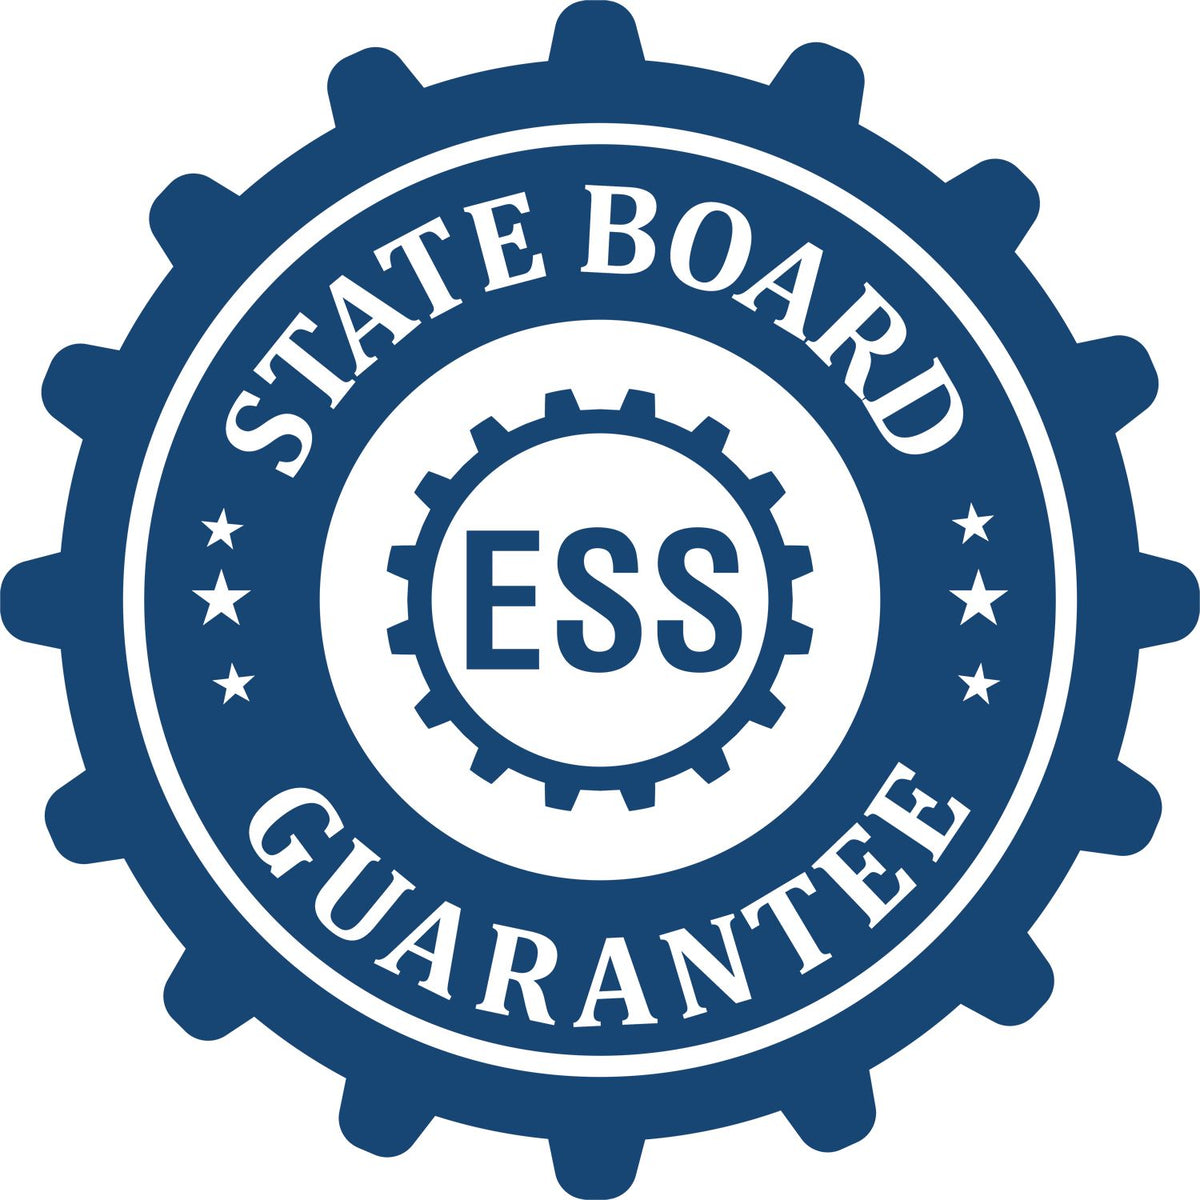 An emblem in a gear shape illustrating a state board guarantee for the Digital Virginia Geologist Stamp, Electronic Seal for Virginia Geologist